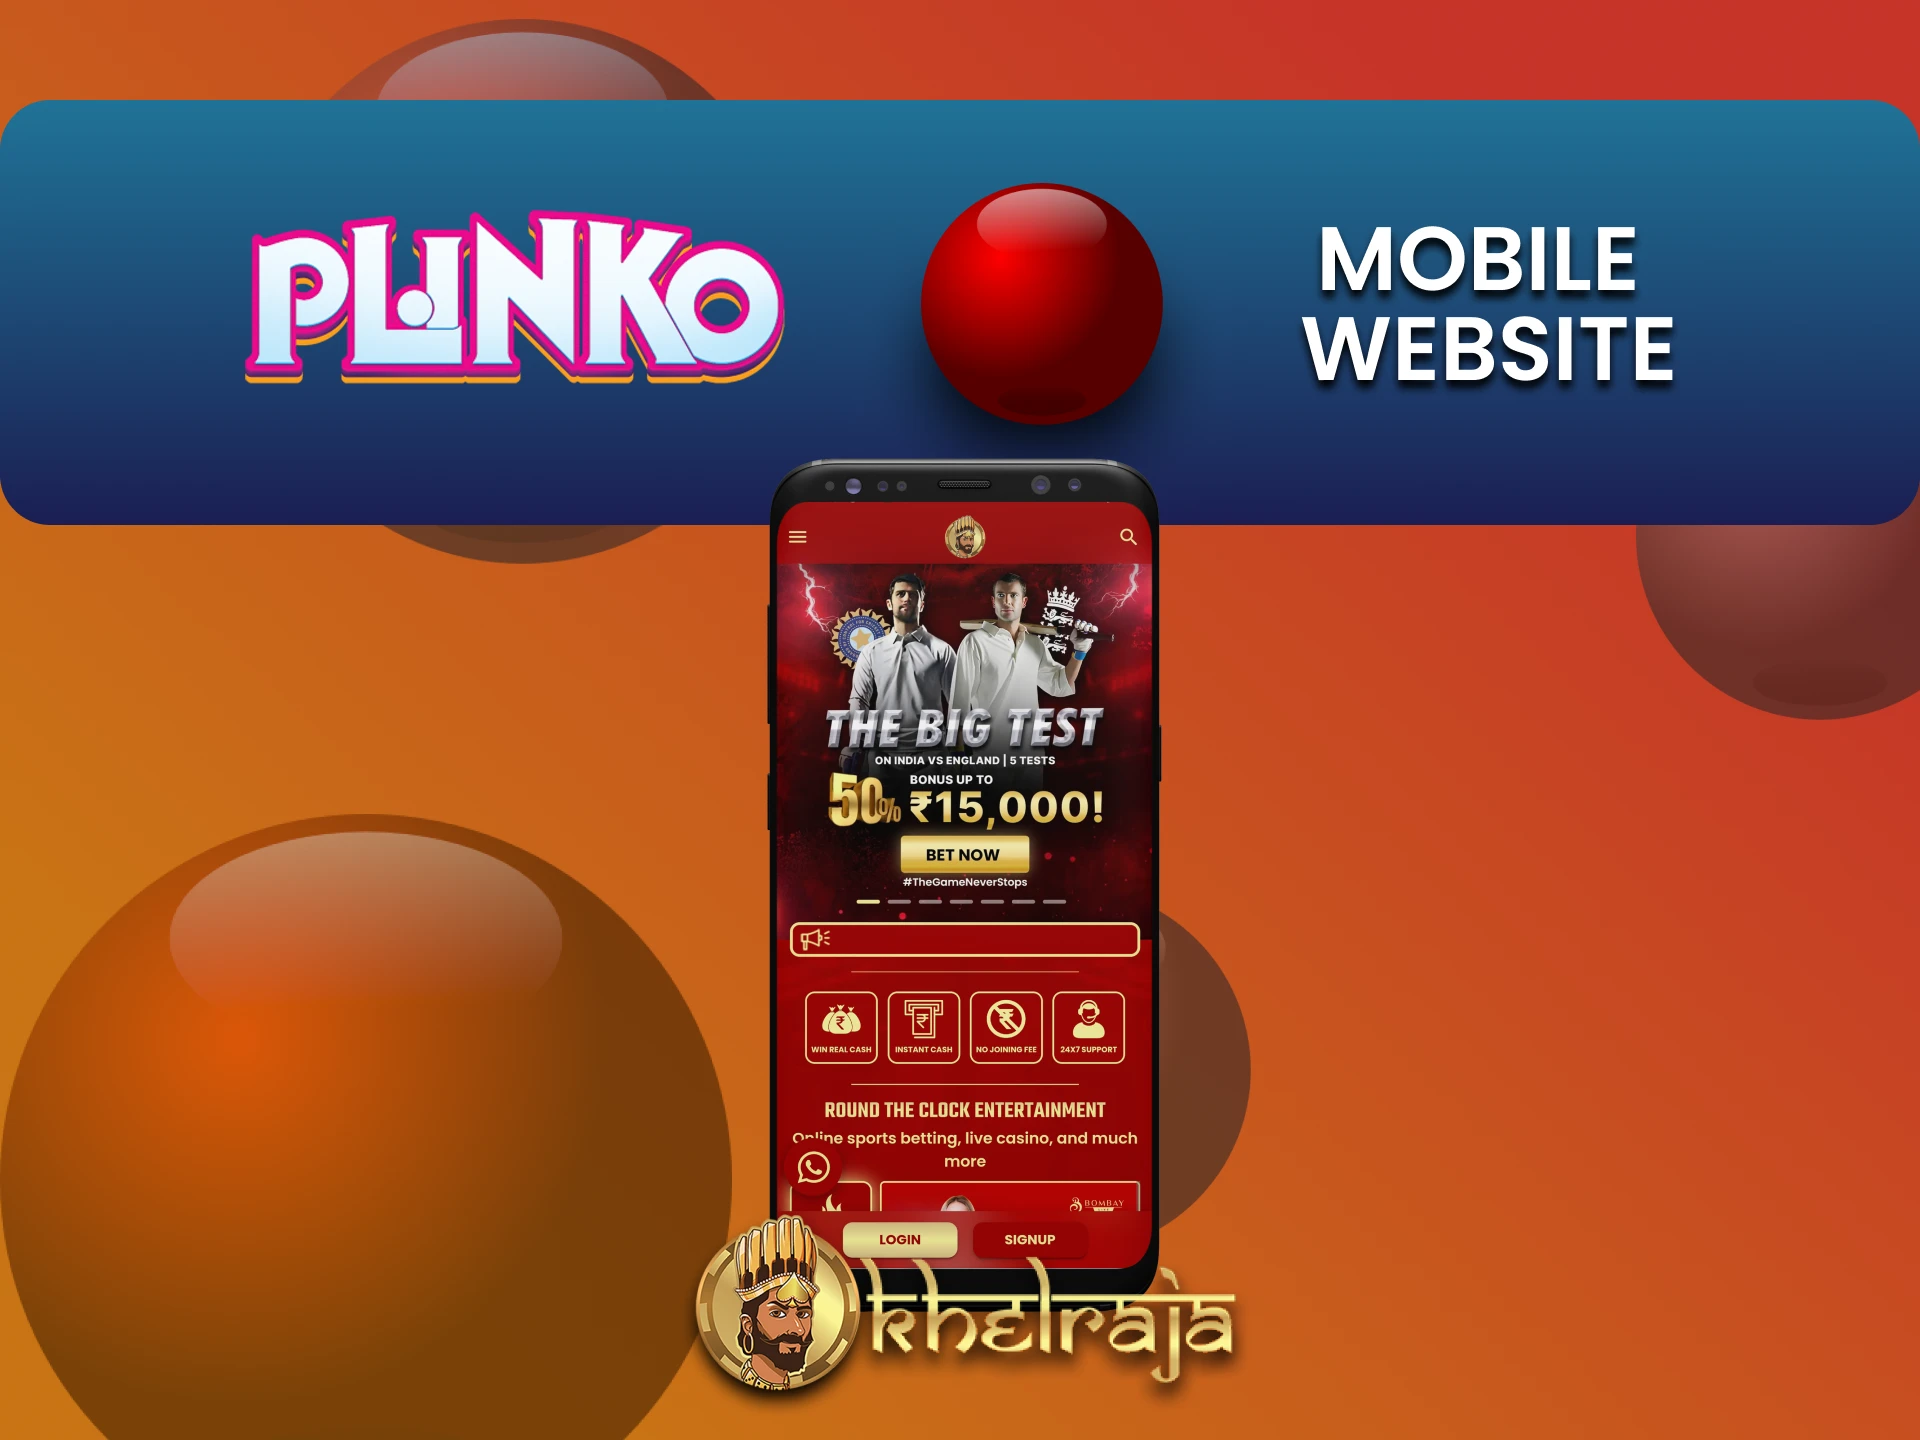 Phone is one of the ways to play Plinko on the Khelraja website.